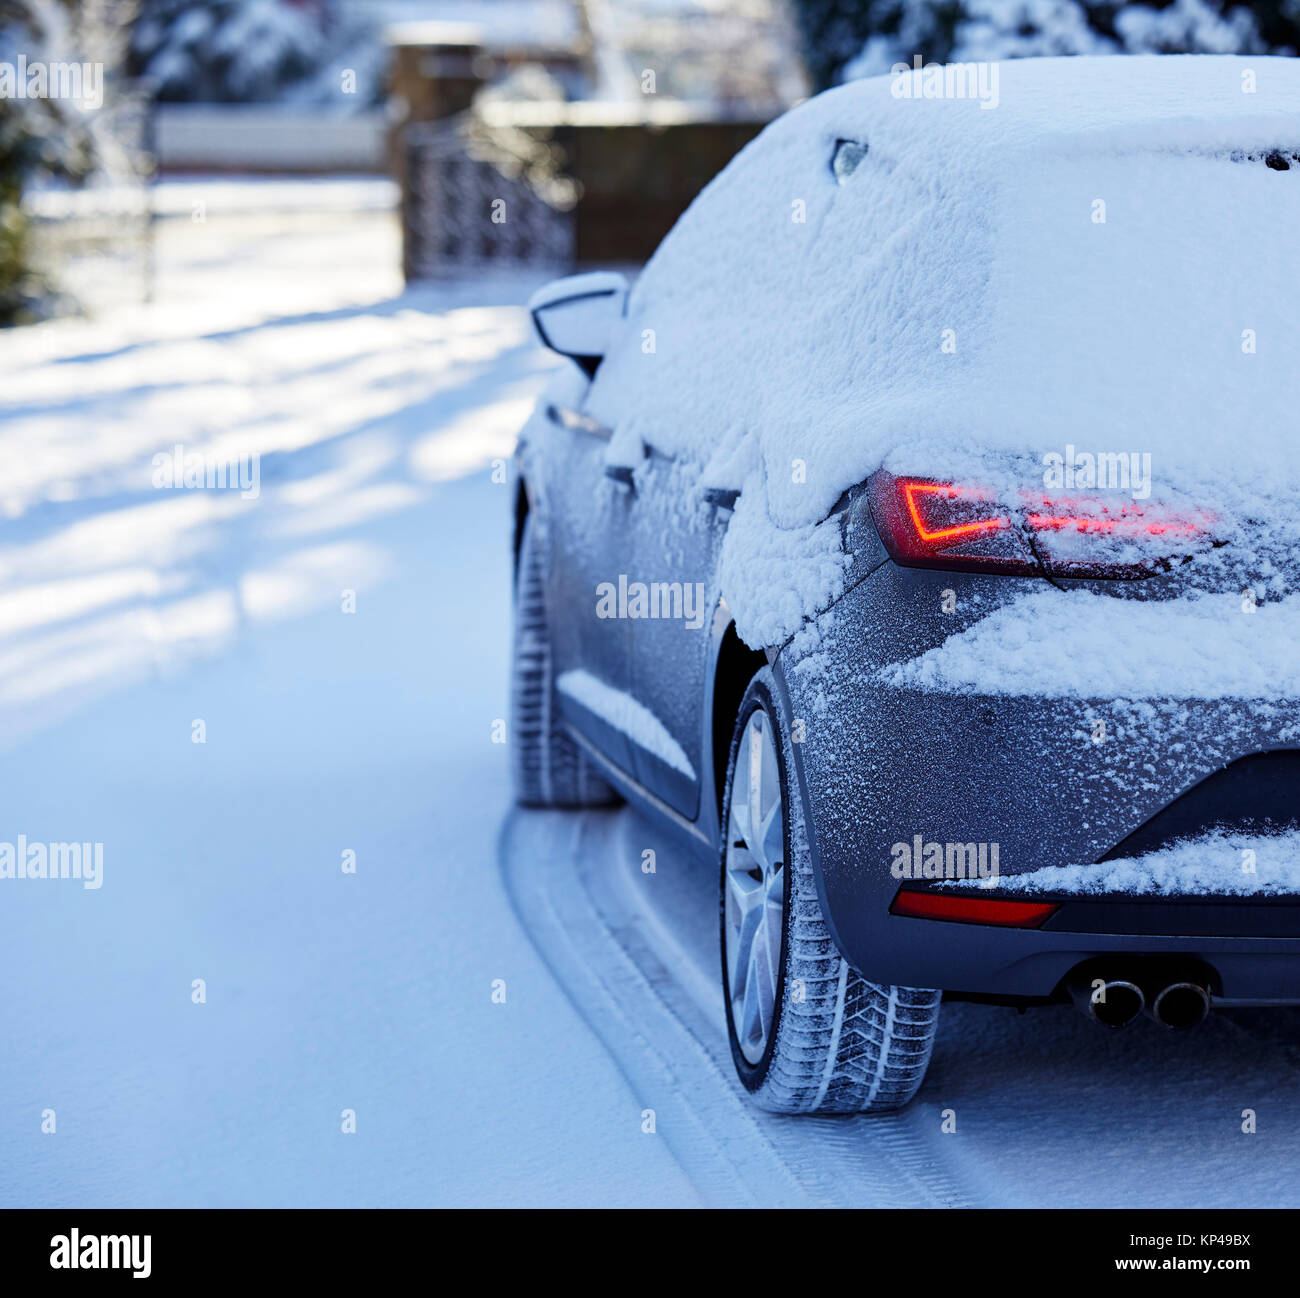 Snow covered car in winter conditions Stock Photo